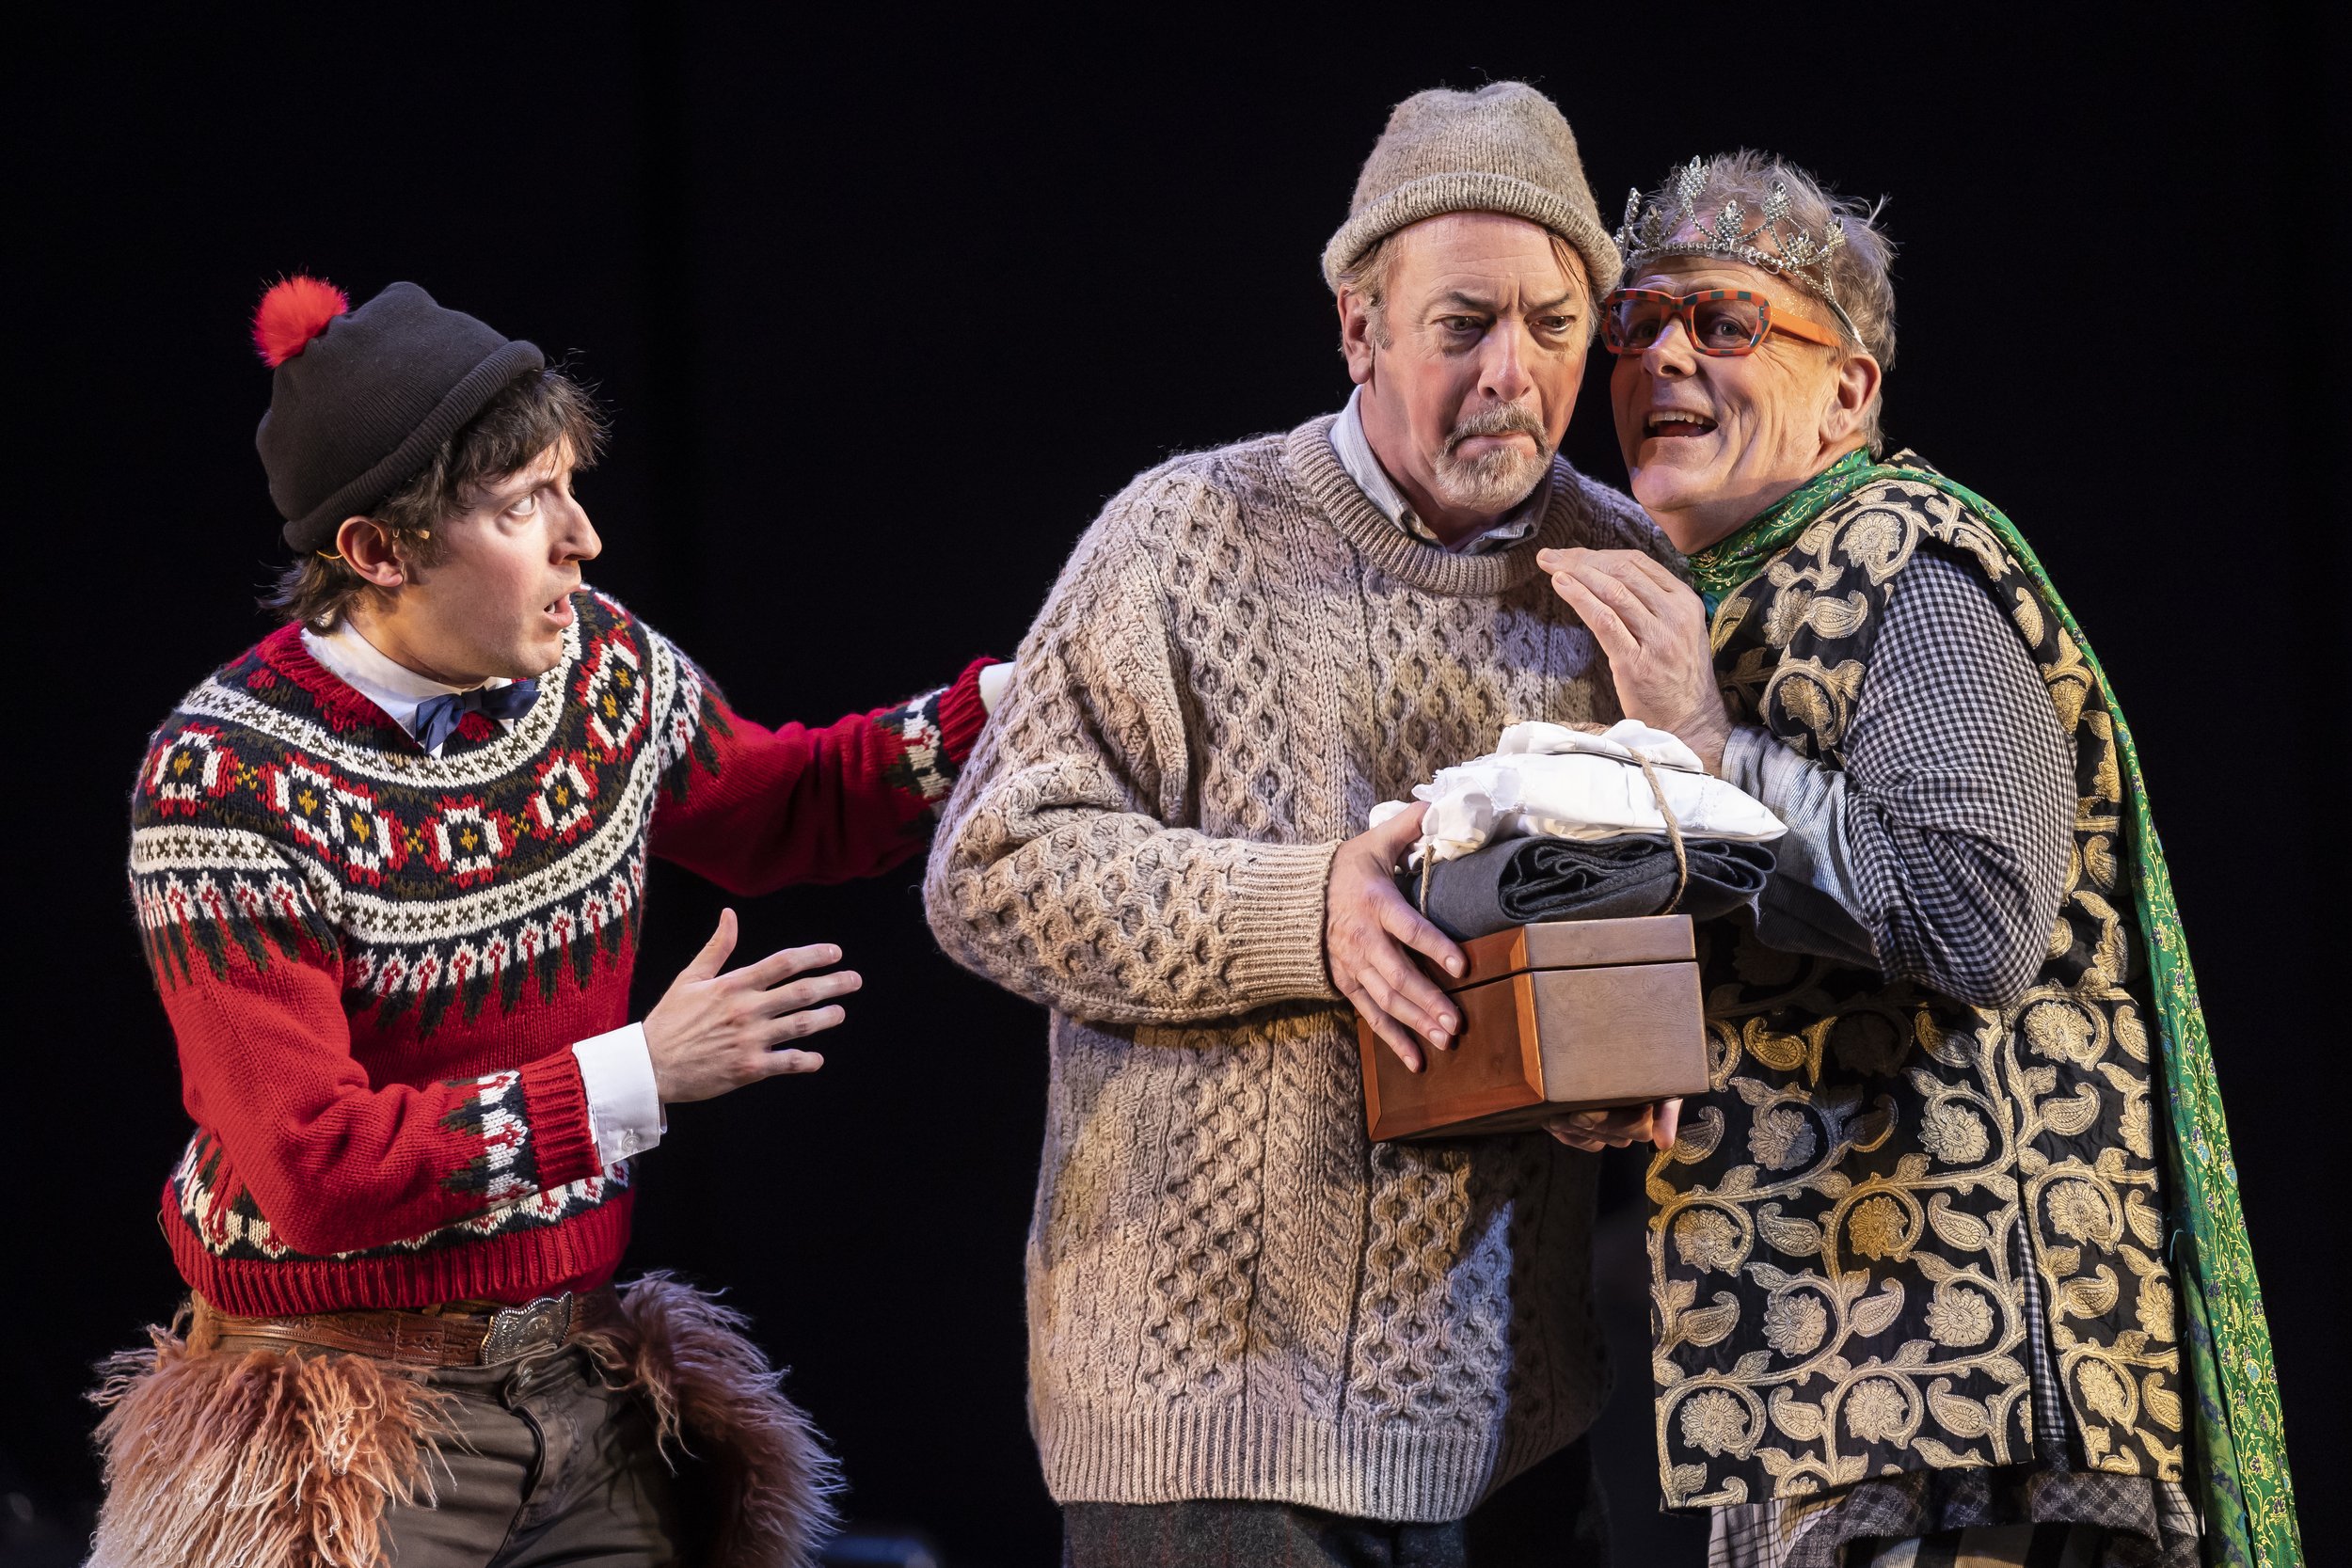 Will Allan (Clown), Tim Monsion (Old Shepherd) and Philip Earl Johnson (Autolycus) in The Winter’s Tale.jpeg